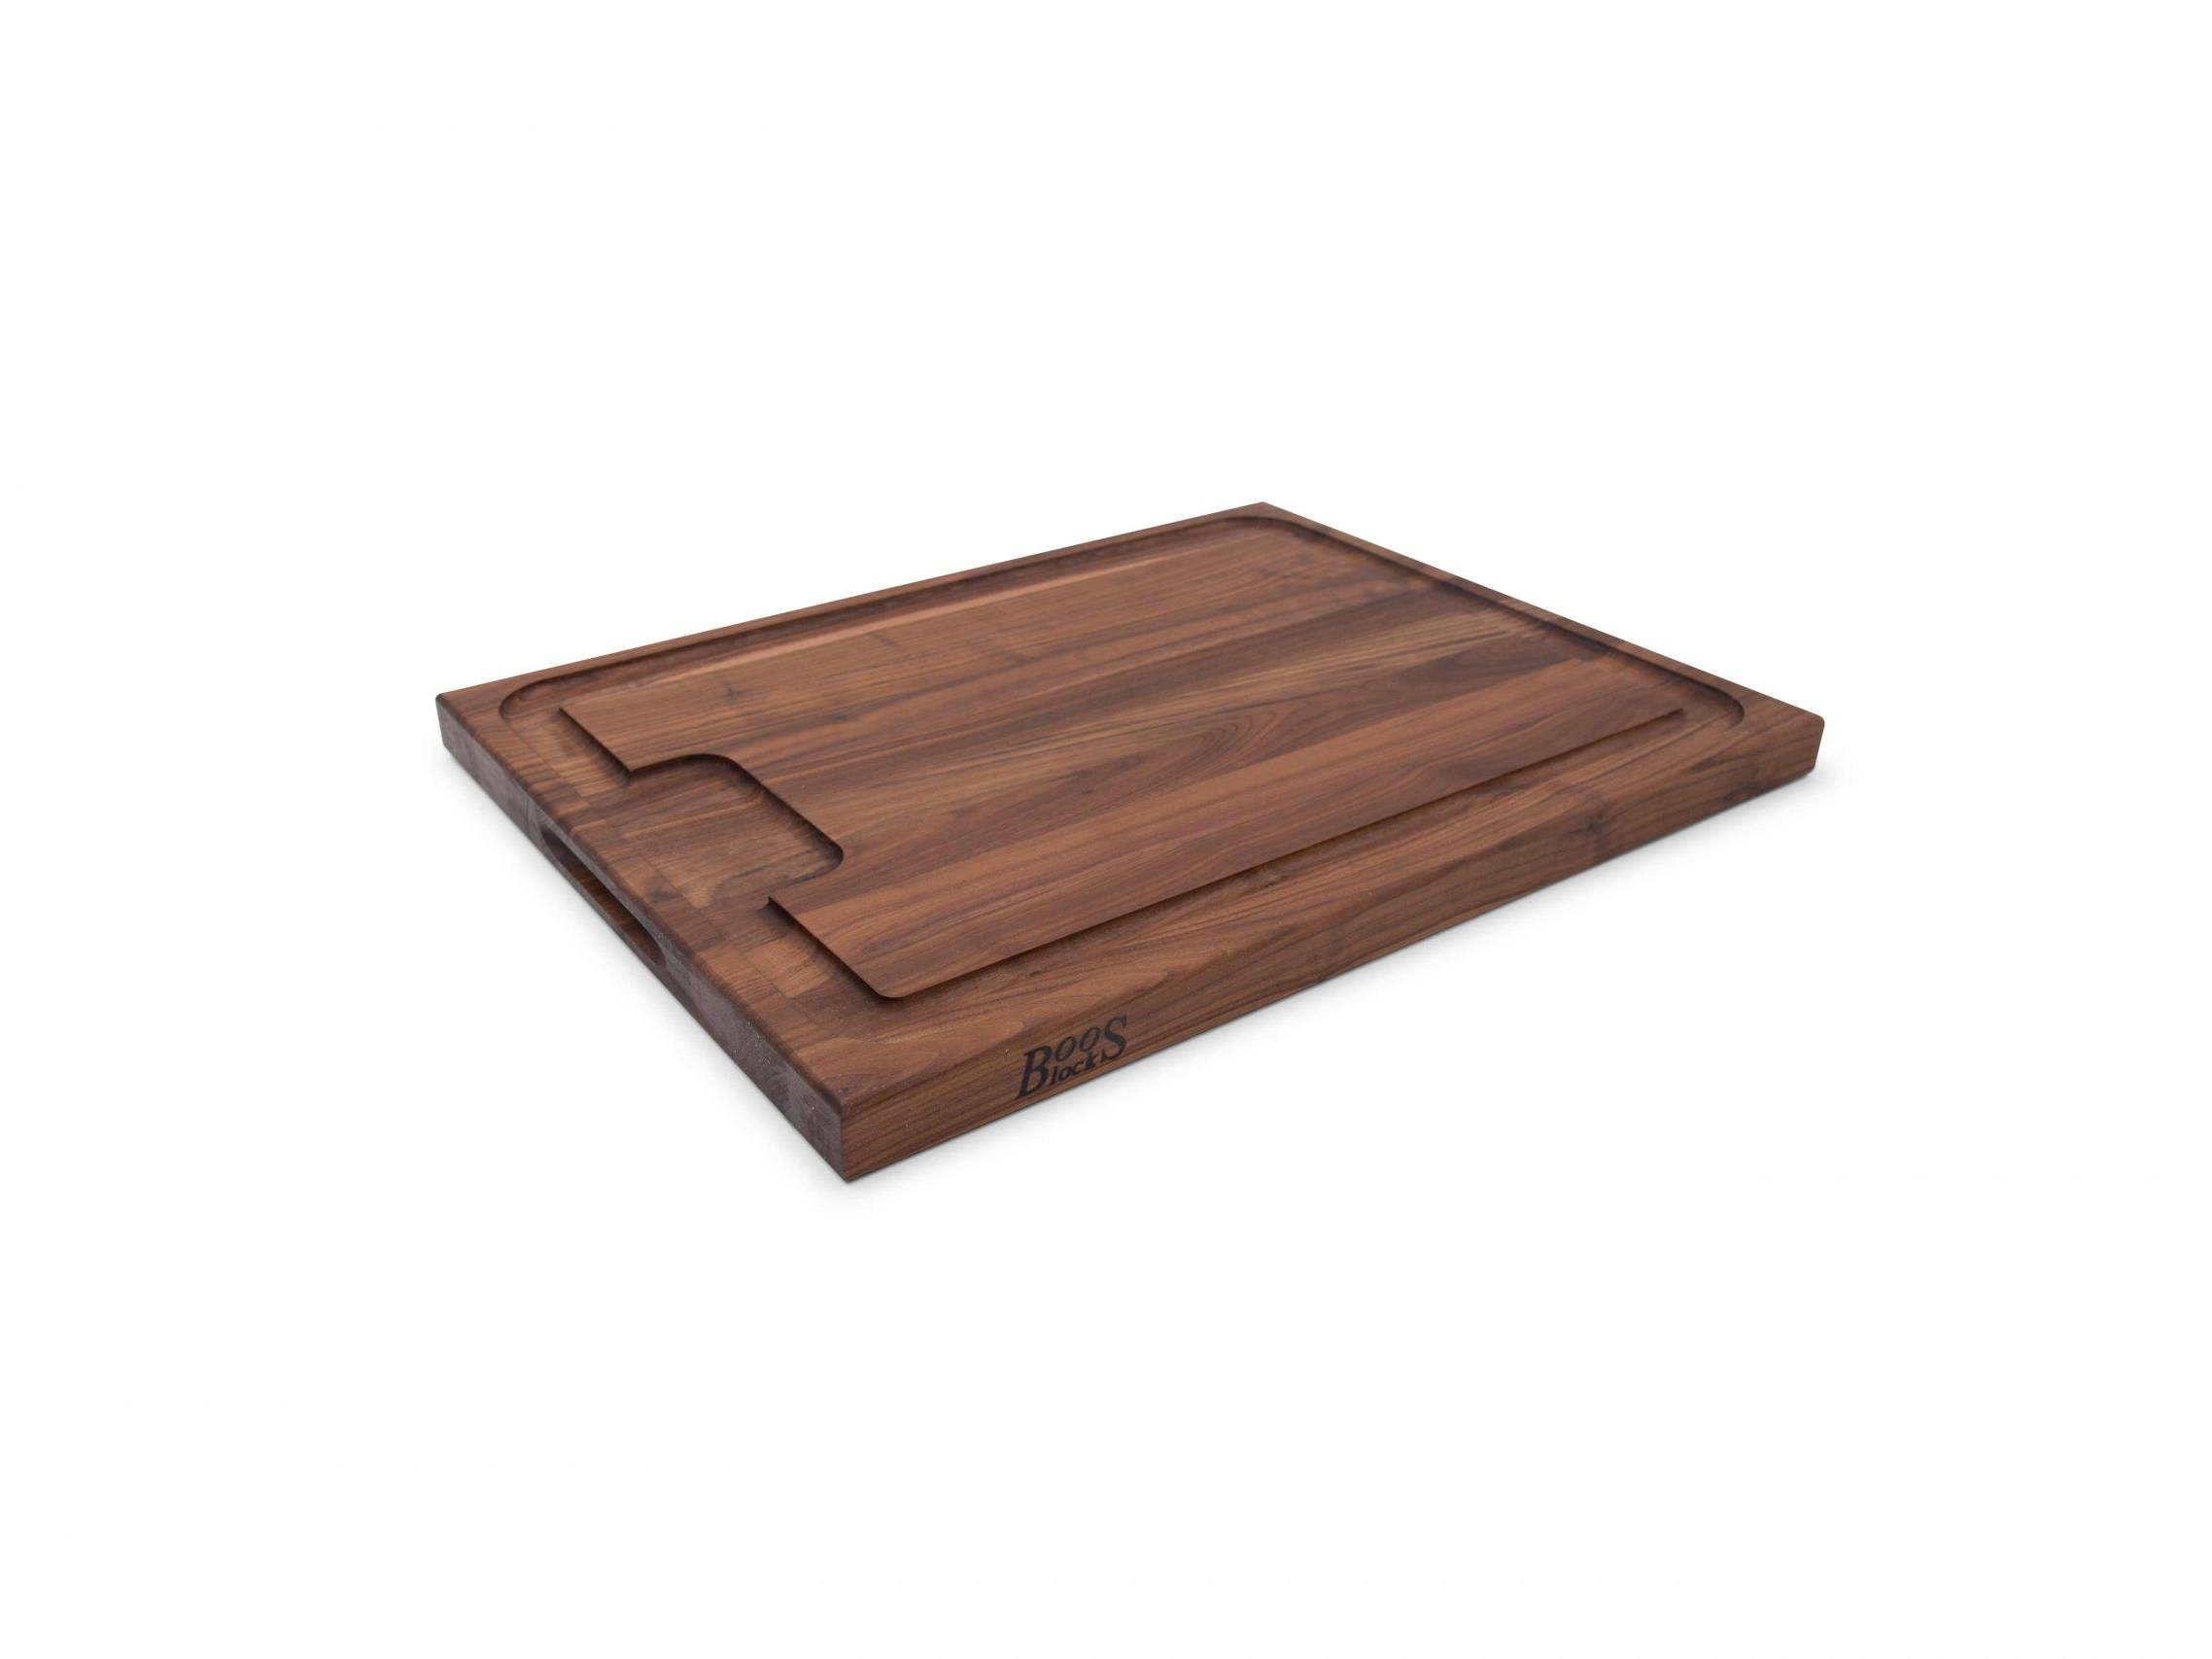 Pro Chef Black Walnut Reversible Cutting Board with Juice Groove and Recessed Handles 21